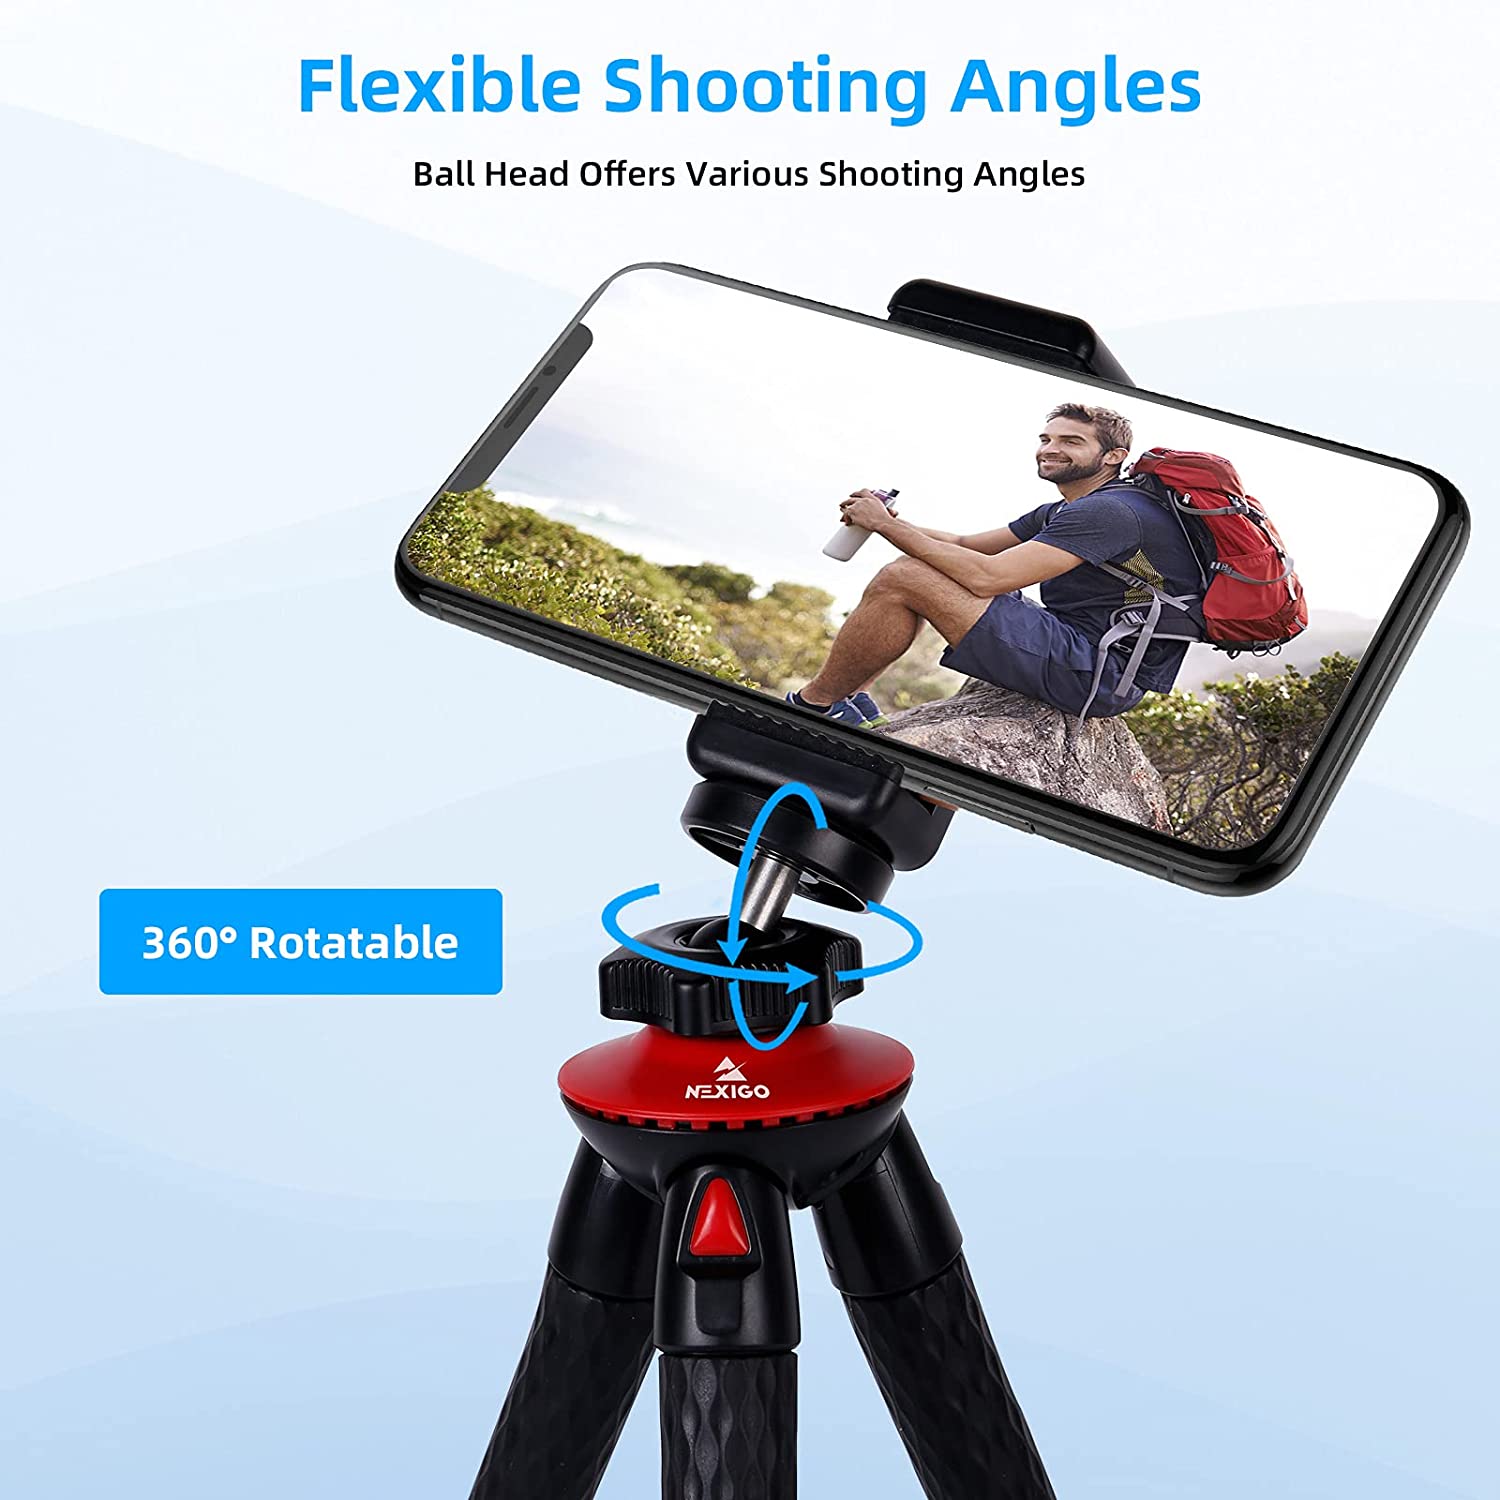 You can place your phone on the holder, and it can be rotated 360 degrees to adjust the shooting angle of the phone.